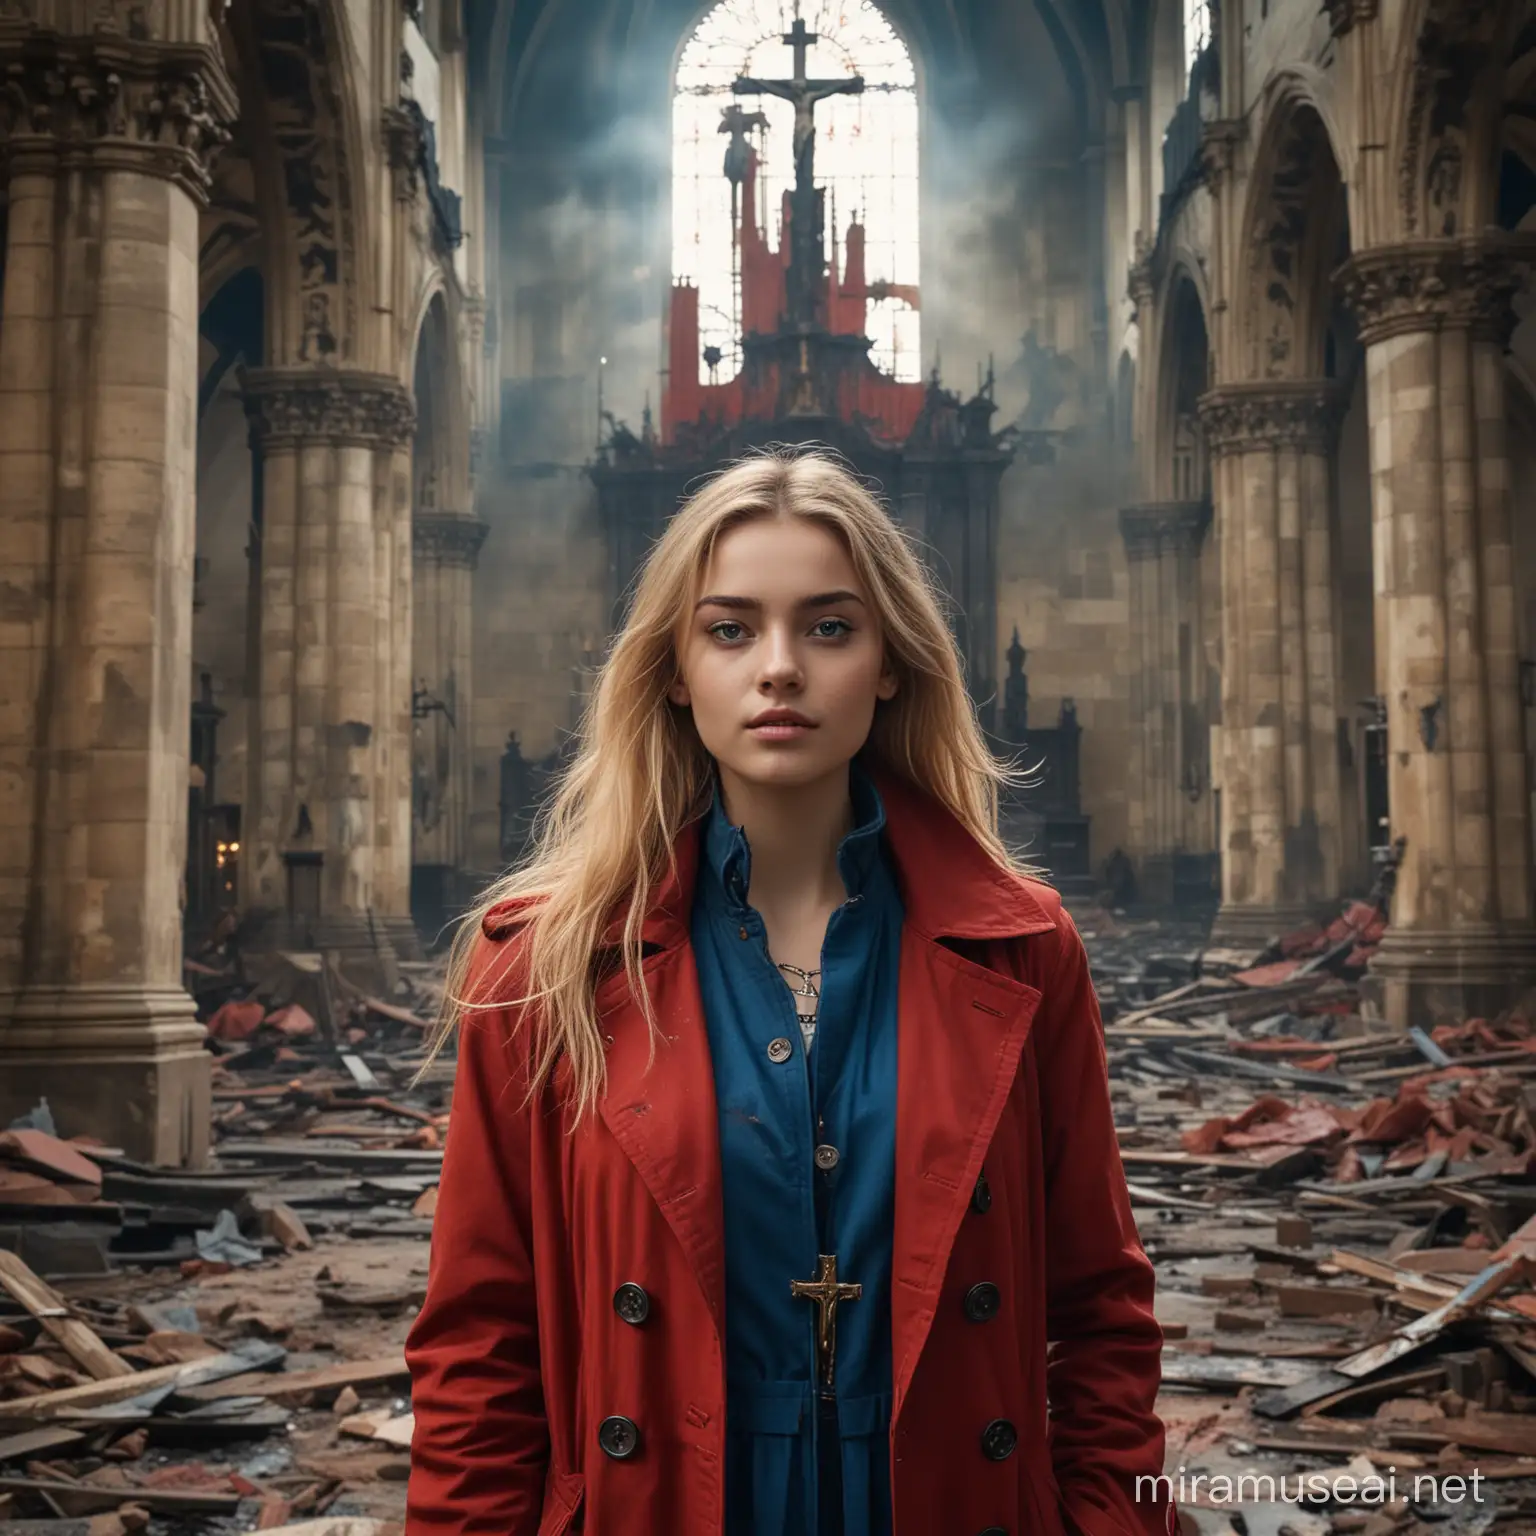 Mysterious Teenage Goddess in Fiery Church Ruins with Peacock and Crucifix